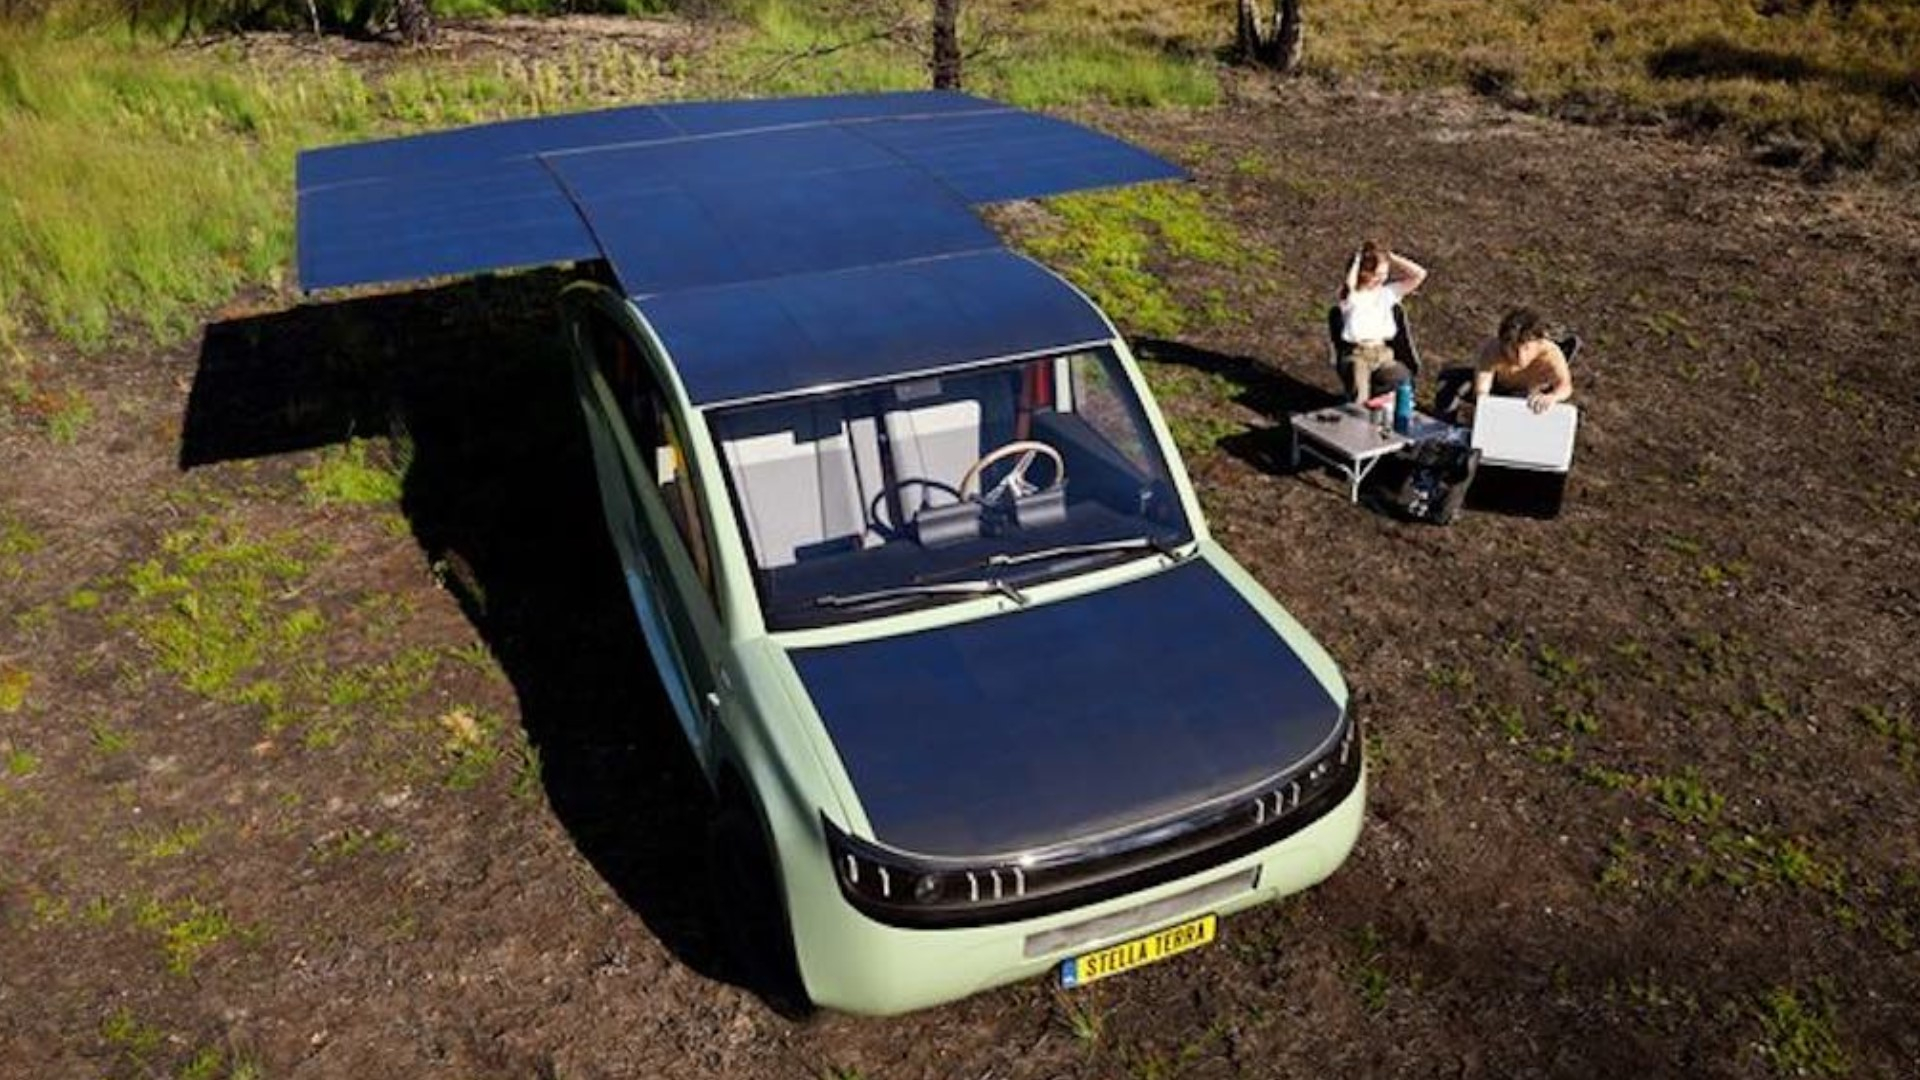 The World's First Solar Powered Vehicle